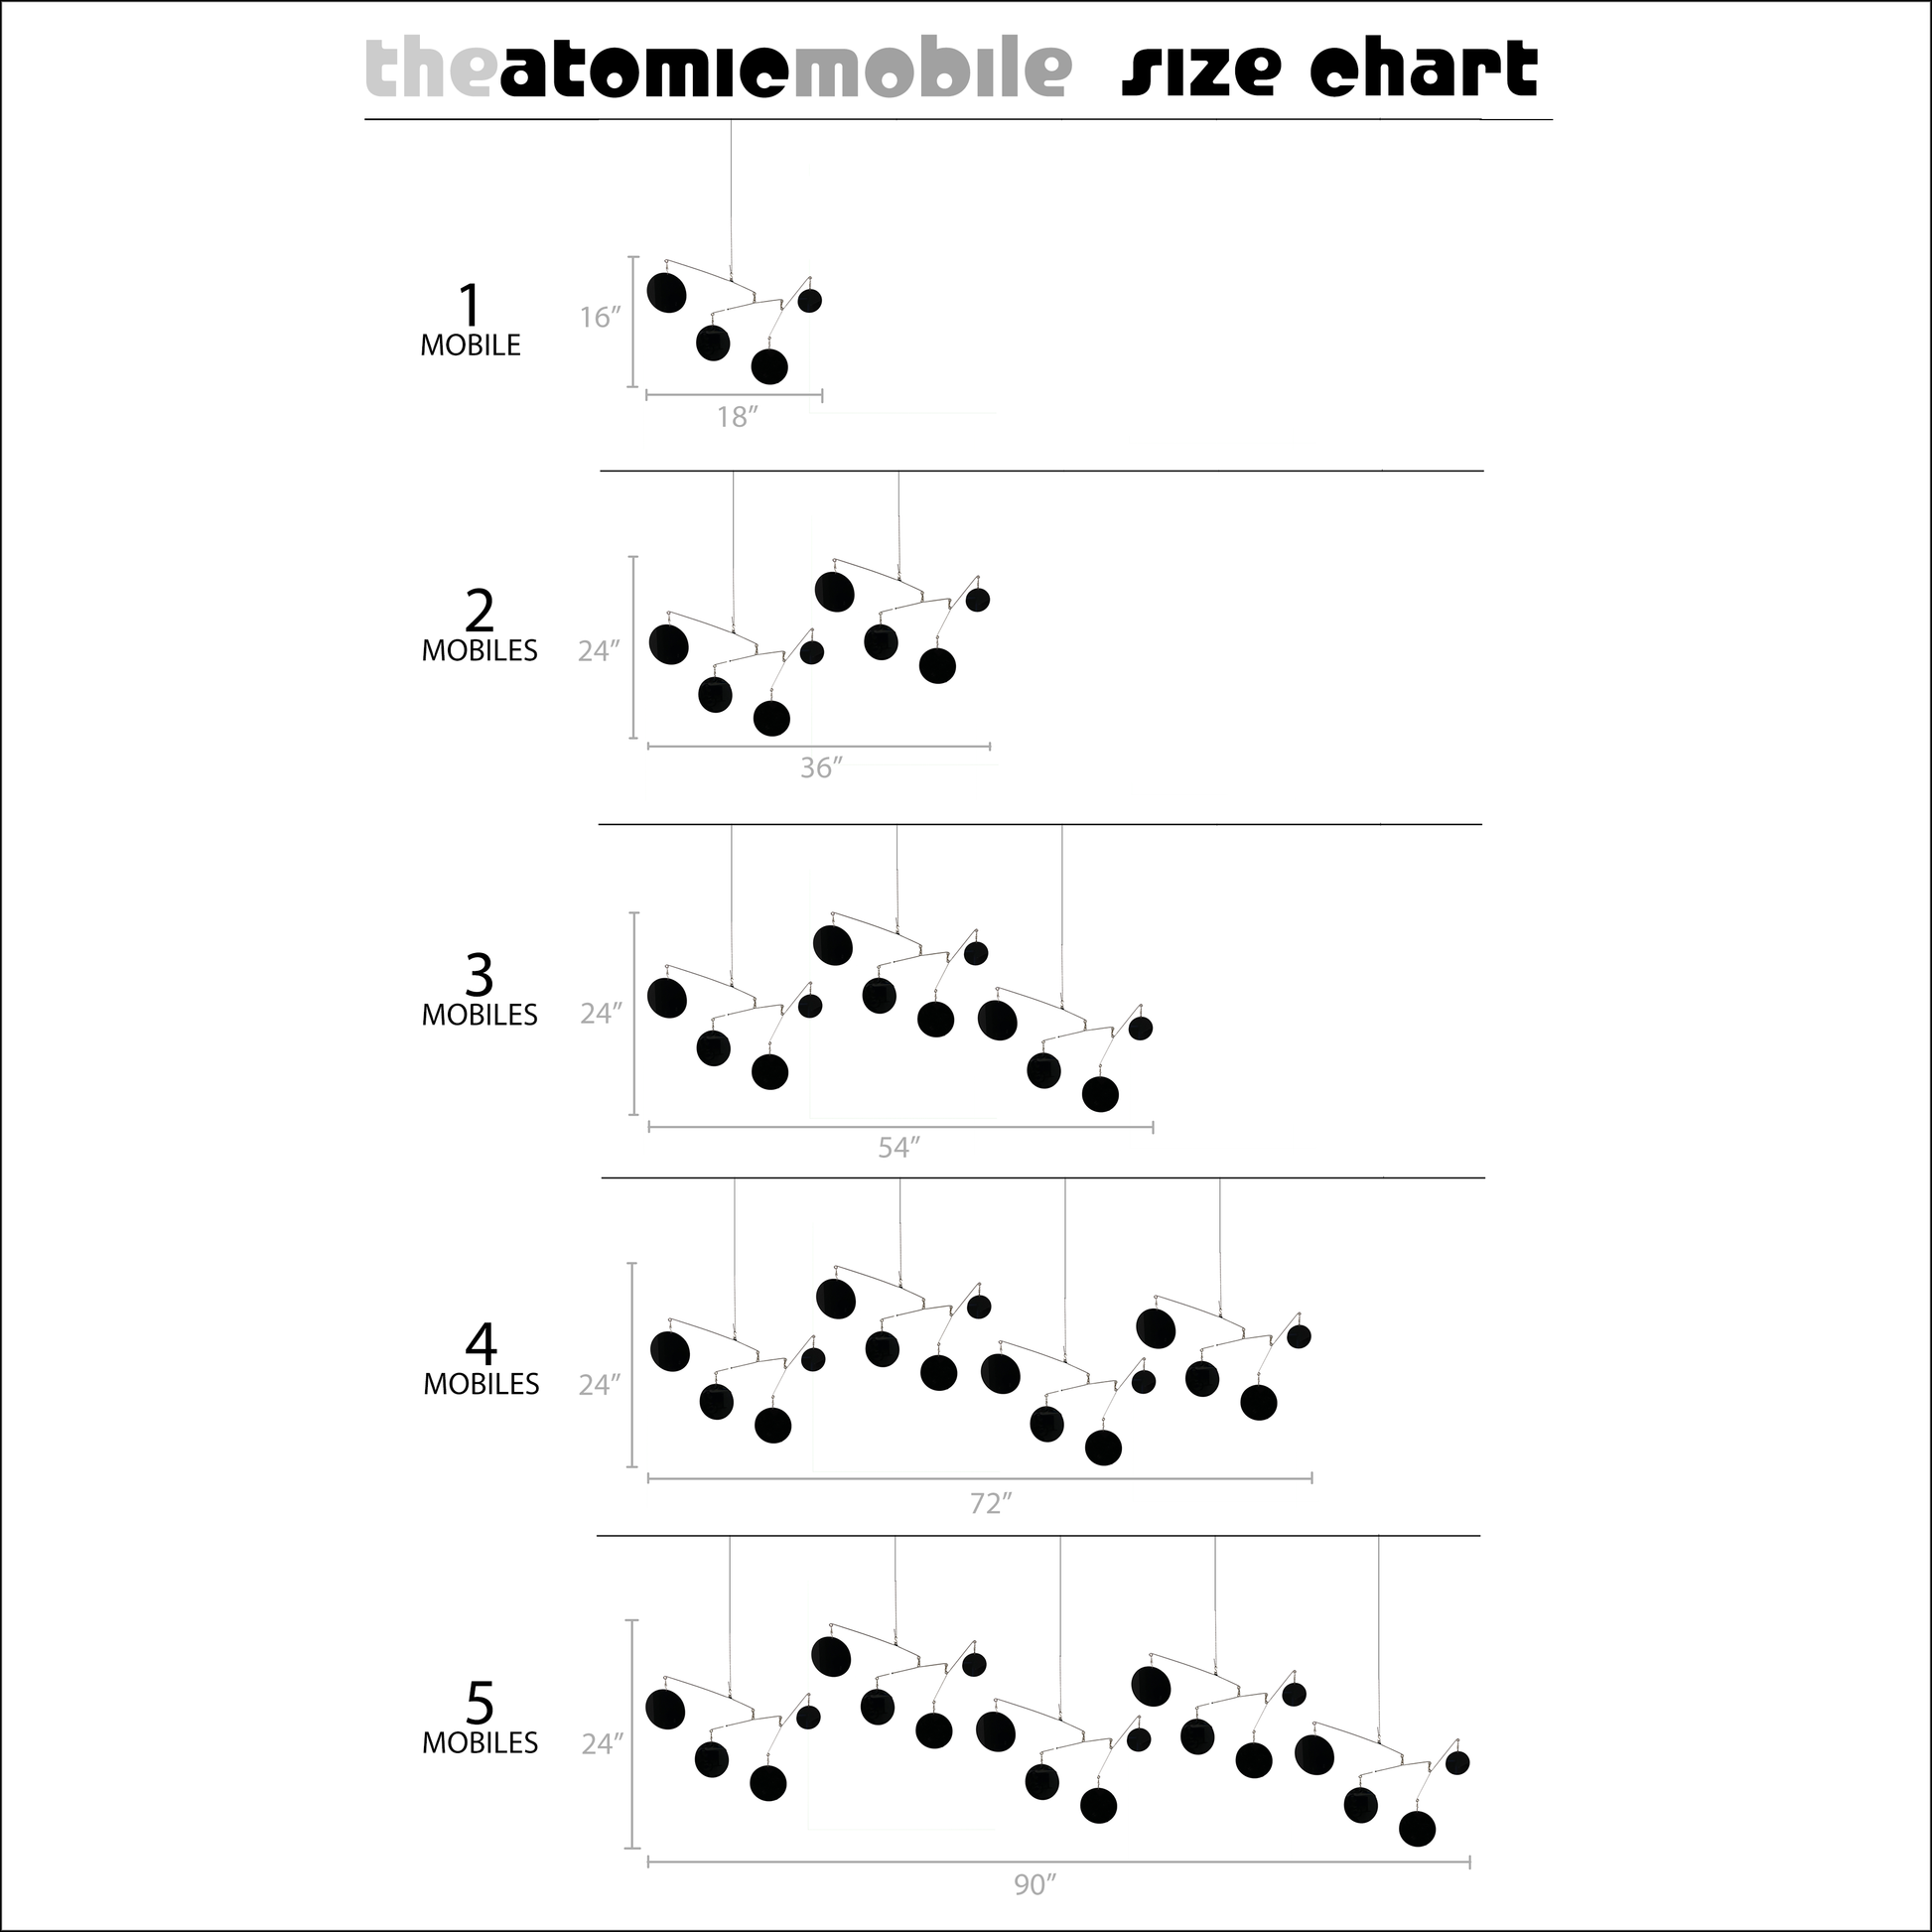 Atomic Mobiles Size Chart - display 1 or more for a cool look! - by AtomicMobiles.com